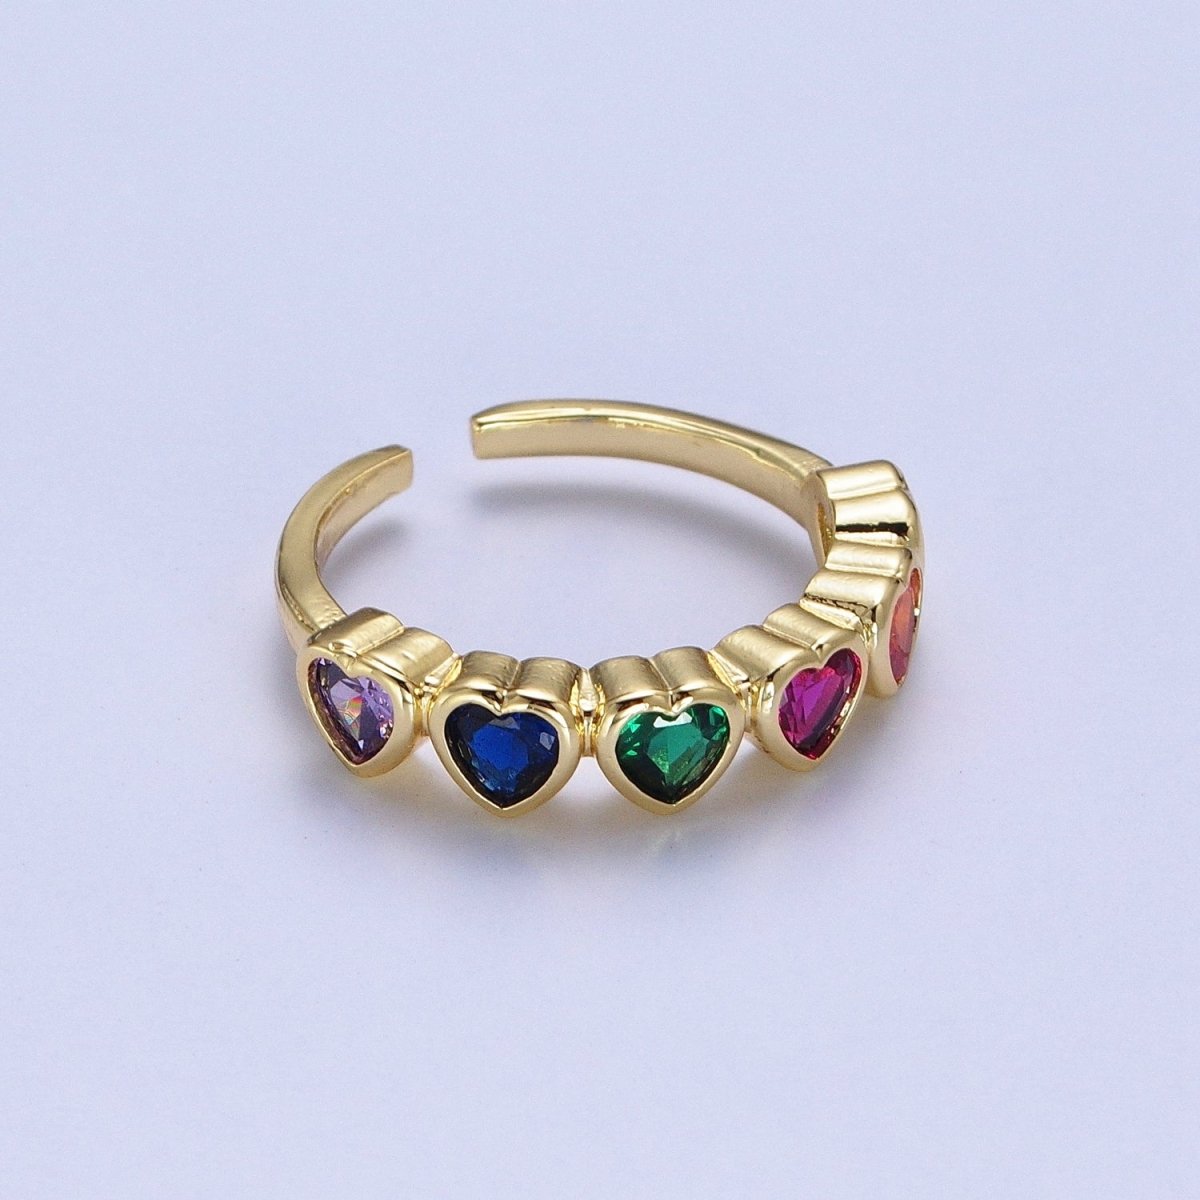 24K Gold Filled Minimalist Colorful Heart Adjustable Ring S-240 - DLUXCA